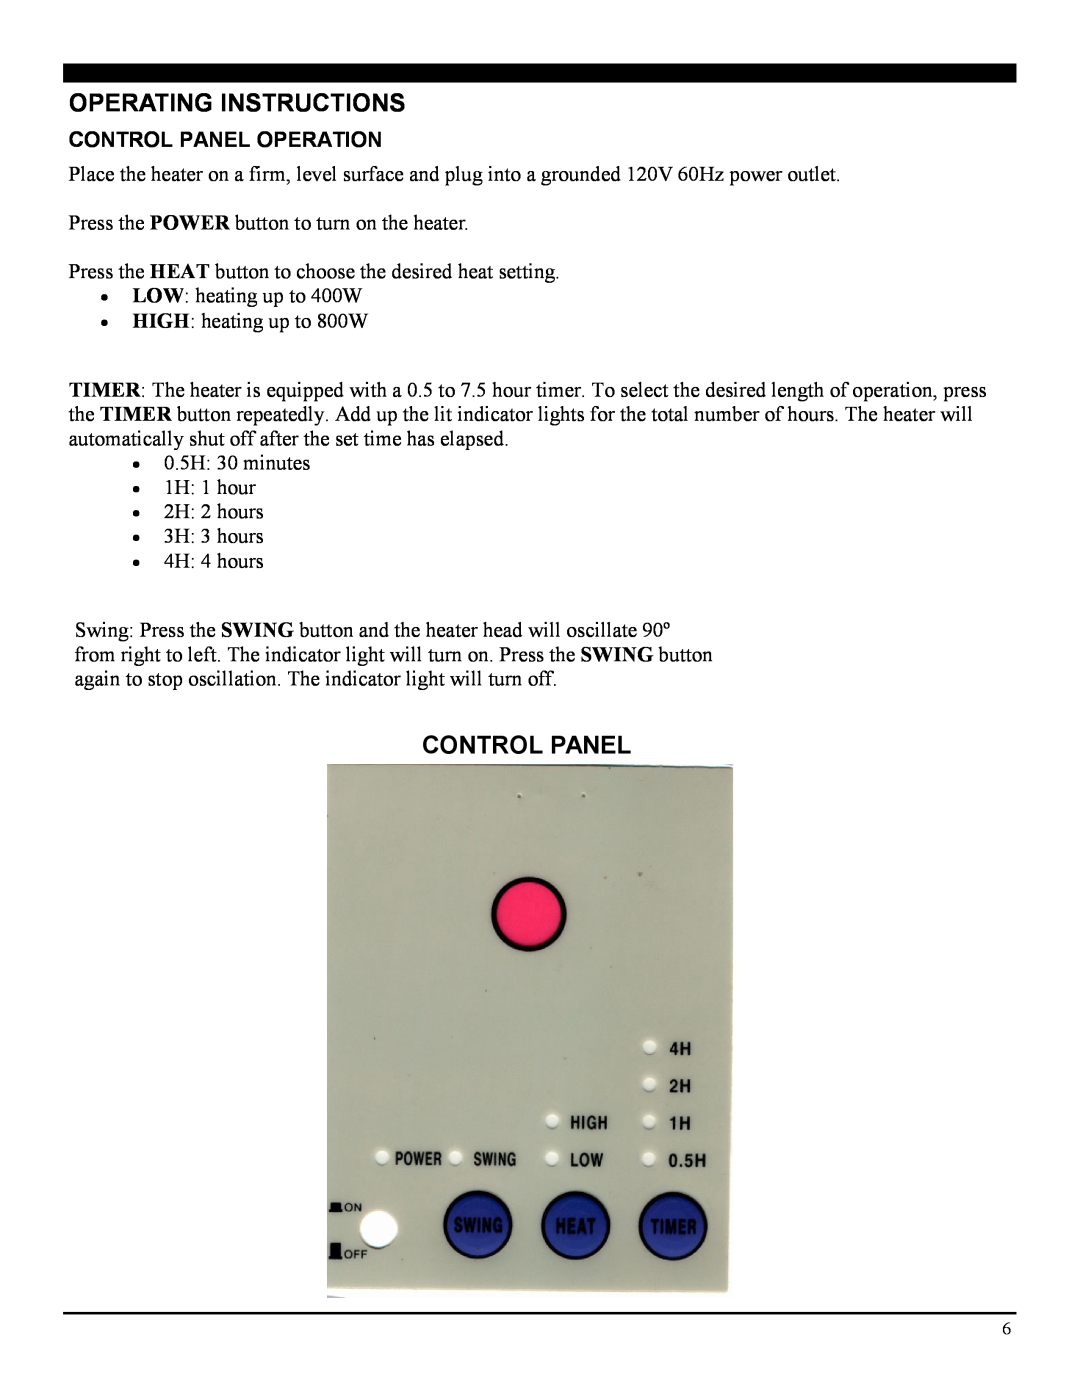 Soleus Air MS-10R operating instructions Operating Instructions, Control Panel 